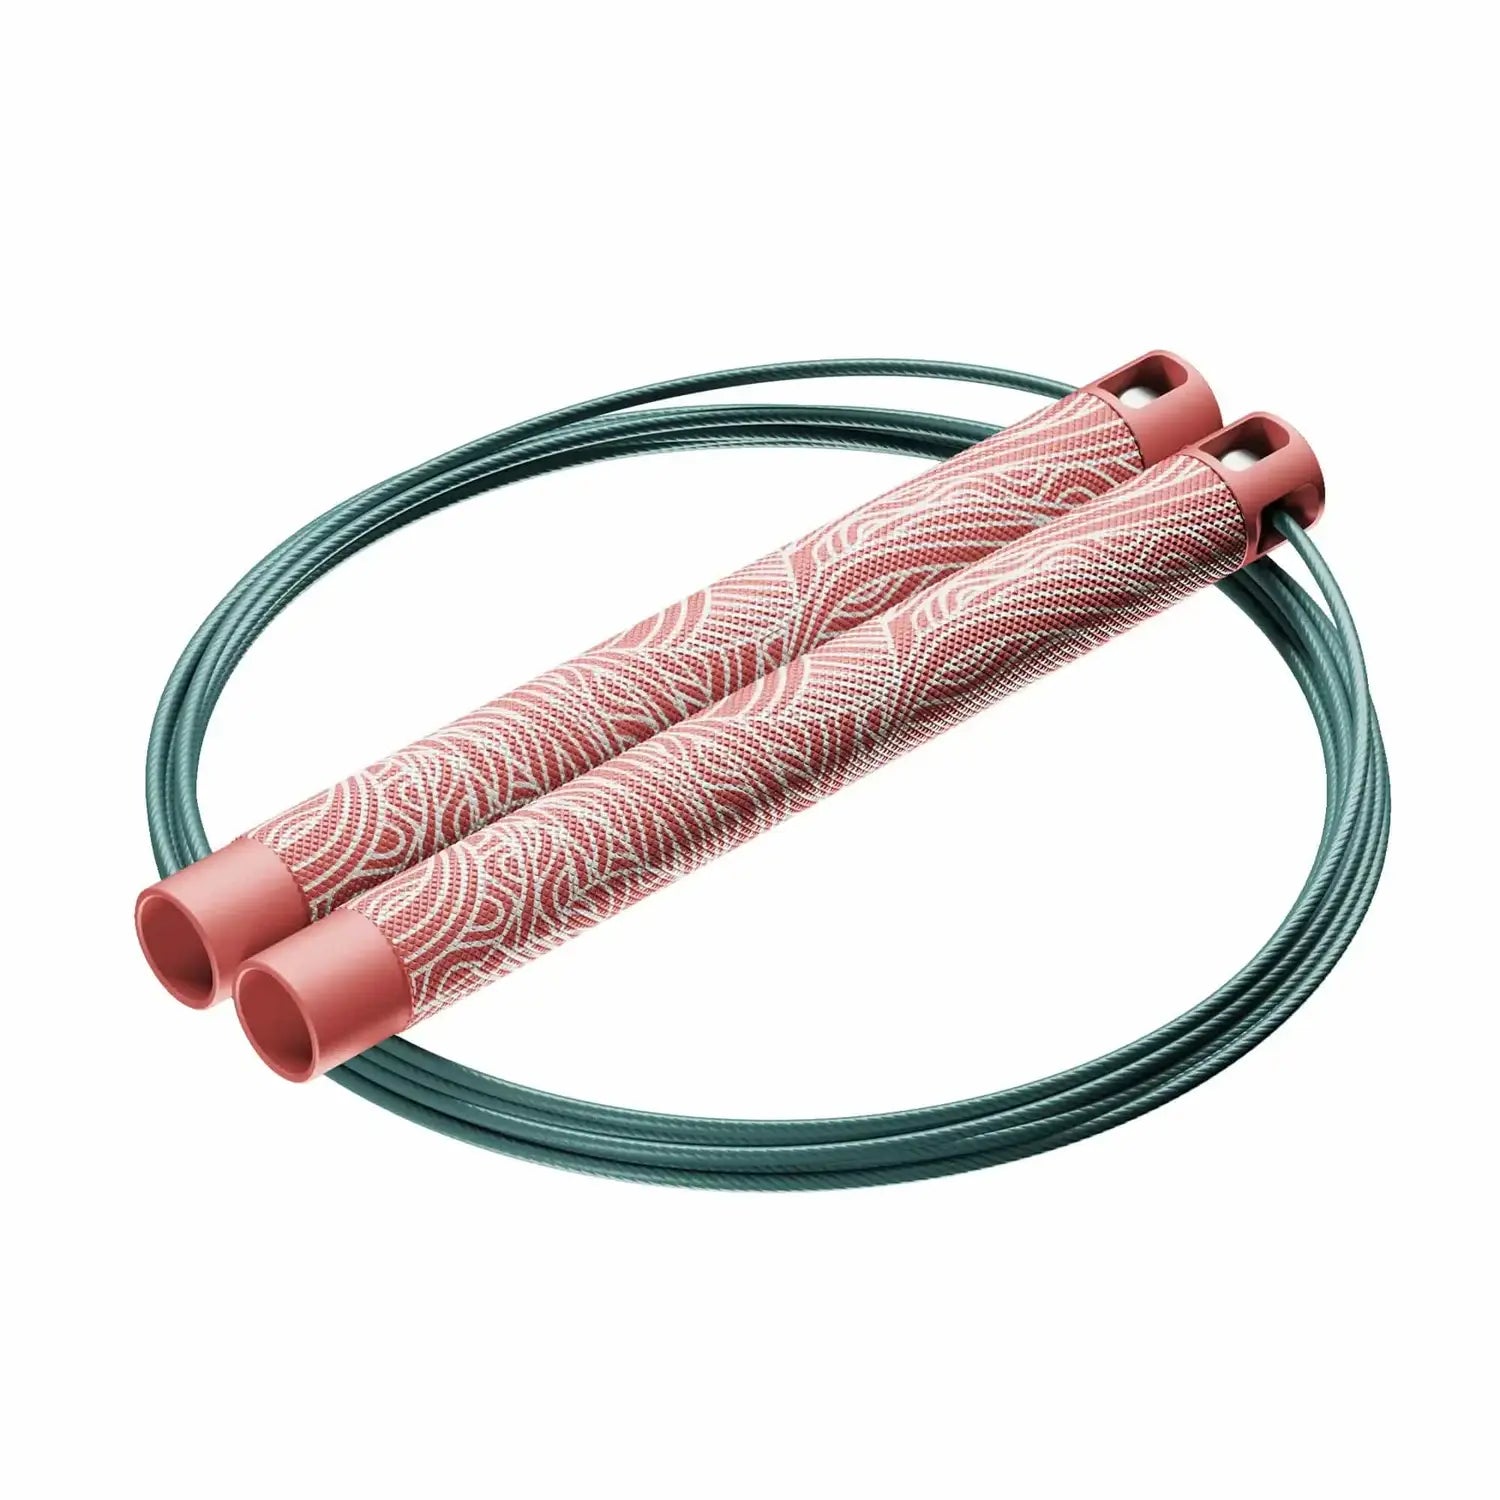 RPM Training Session4 Speed Rope (Trainingsspringseil) Rose Decorated (Special Edition) kaufen bei HighPowered.ch